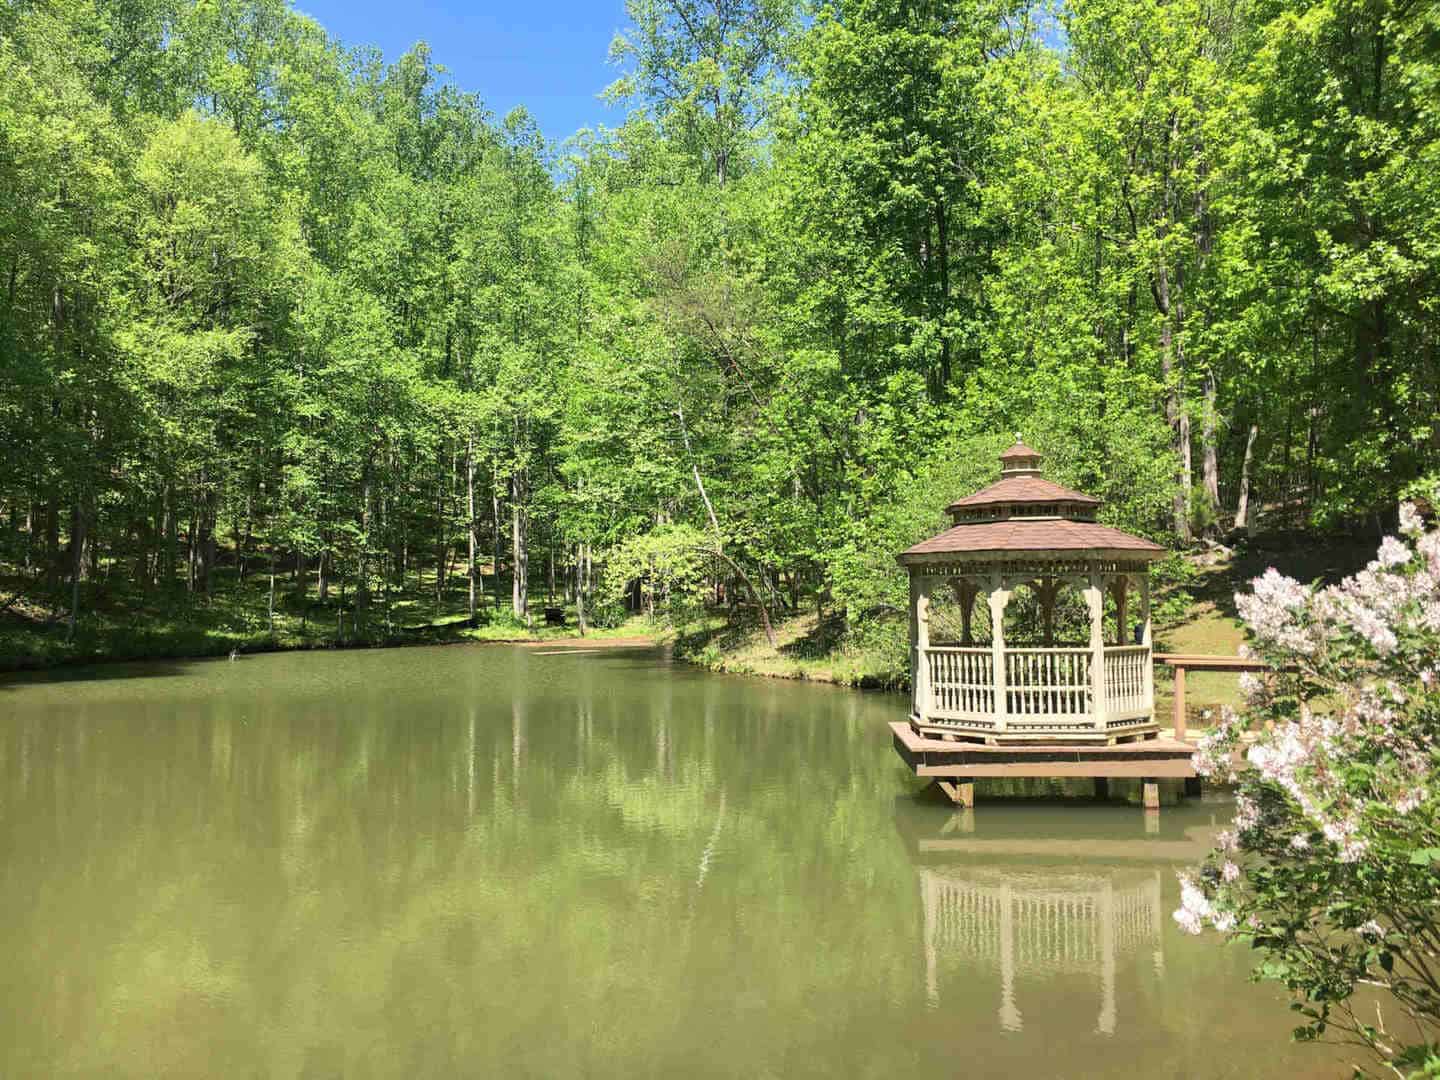 Gazebo on the pond at the Sanctuary